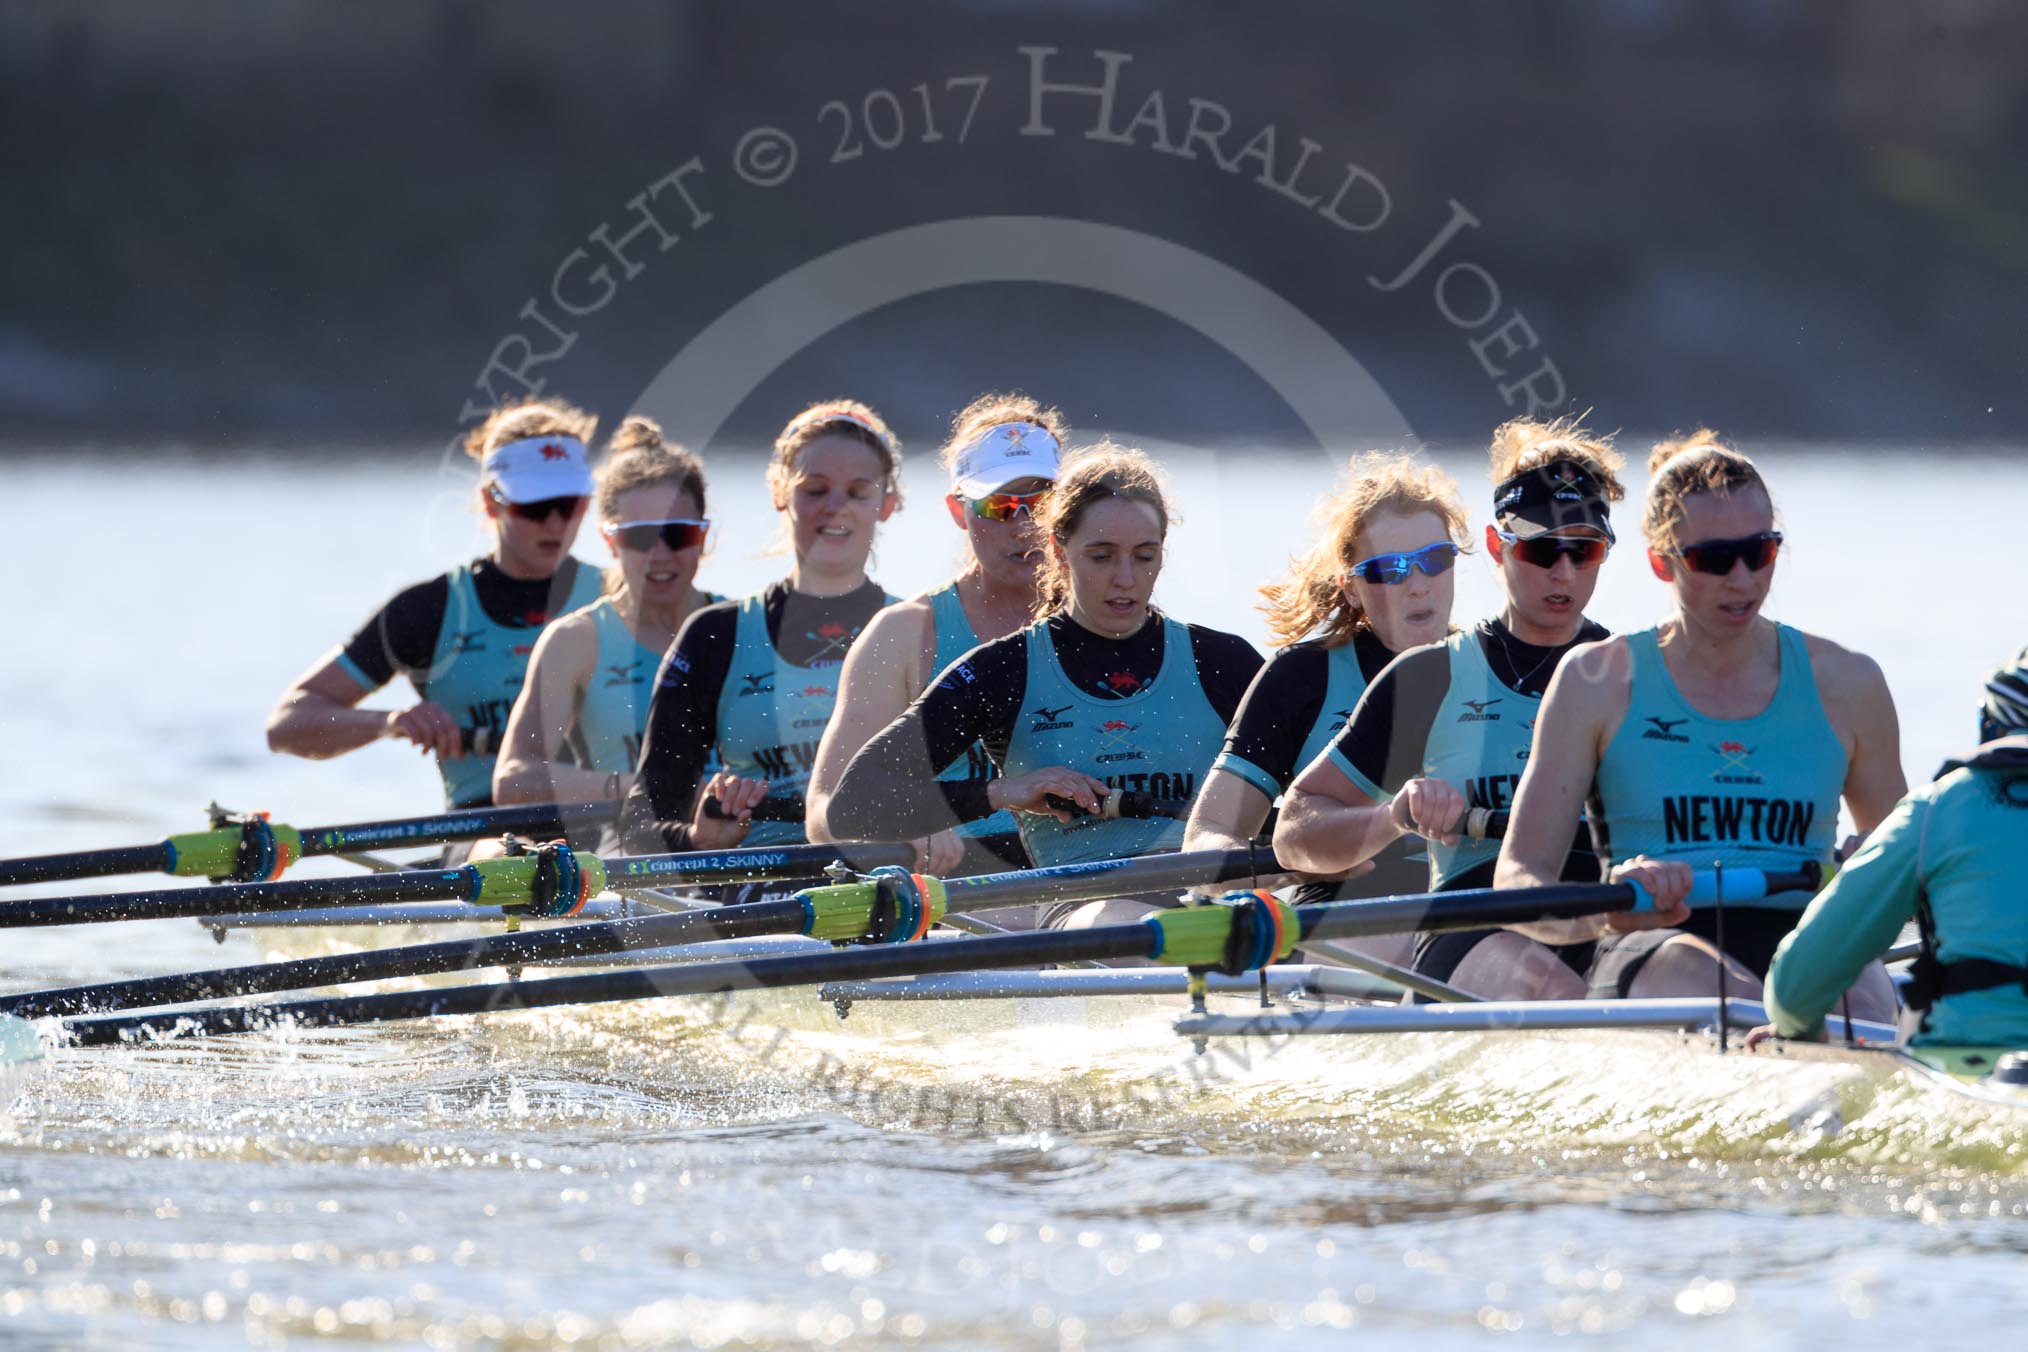 The Women's Boat Race season 2018 - fixture CUWBC vs. ULBC: The CUWBC Eight - here bow Ally French, 2 Robyn Hart-Winks, 3 Fionnuala Gannon, 4 Katherine Barnhill, 5 Hannah Roberts, 6 Oonagh Cousins, 7 Imogen Grant, stroke Tricia Smith, cox Sophie Shapter.
River Thames between Putney Bridge and Mortlake,
London SW15,

United Kingdom,
on 17 February 2018 at 13:31, image #143